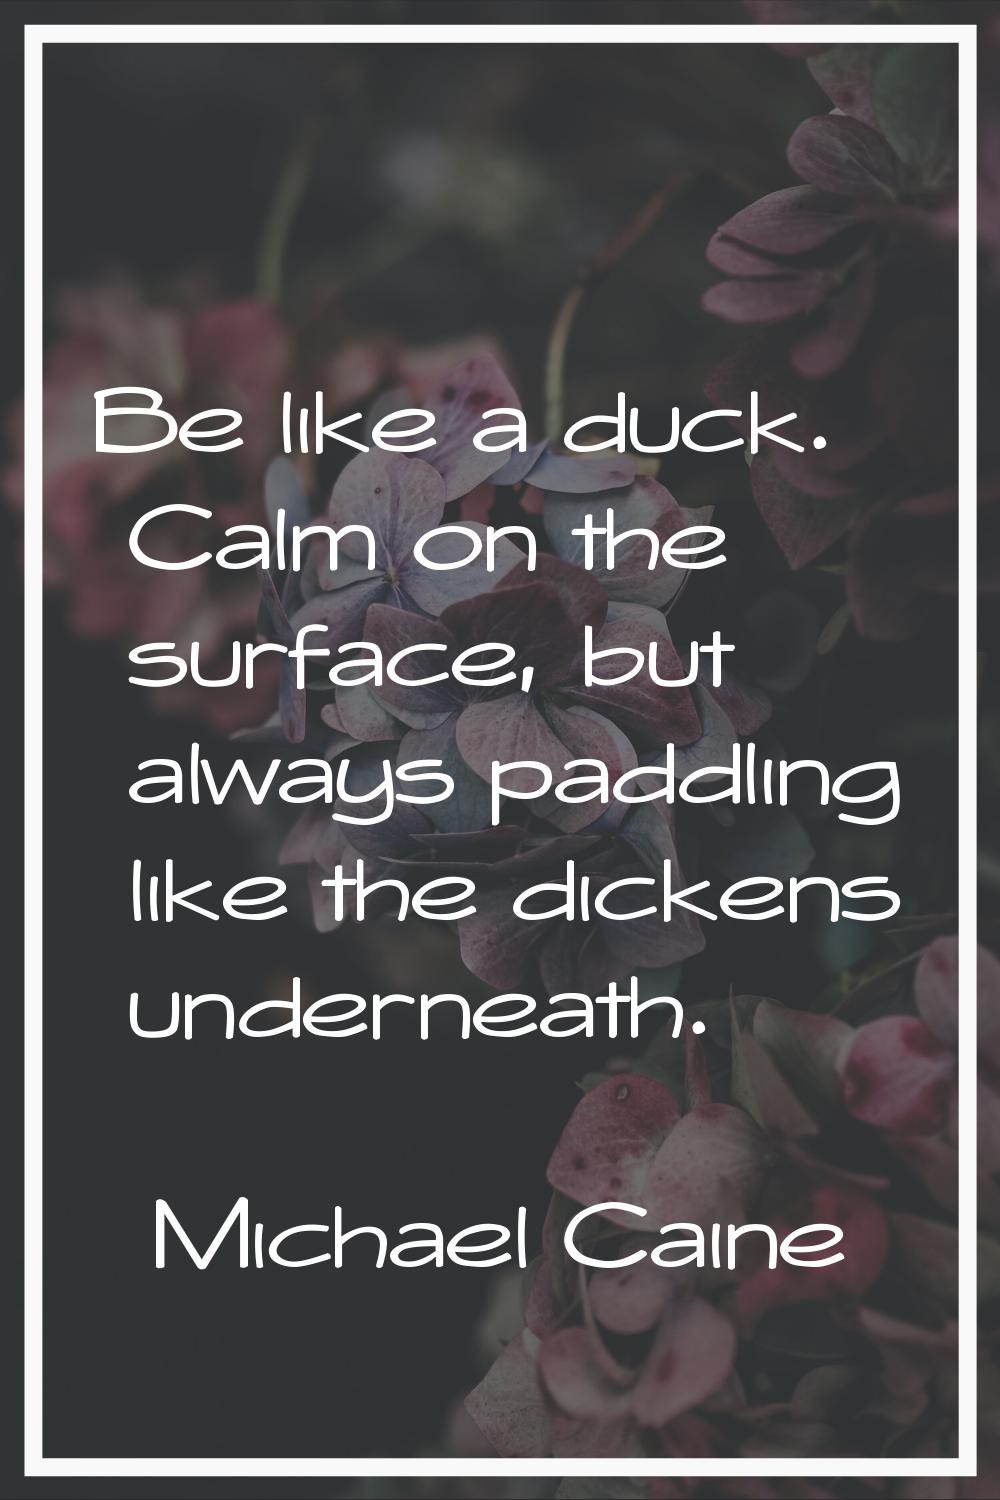 Be like a duck. Calm on the surface, but always paddling like the dickens underneath.